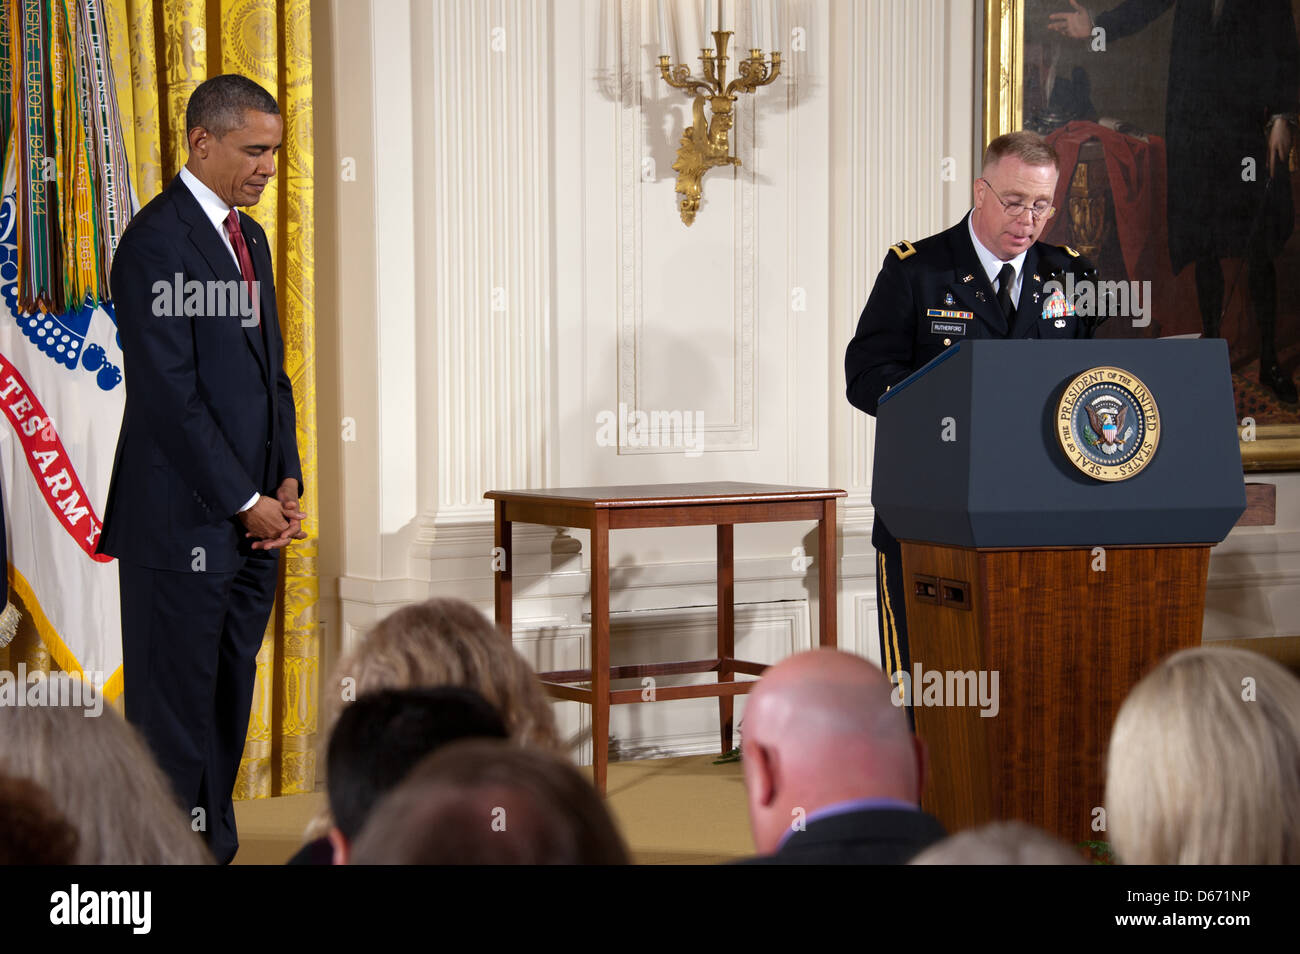 US President Barack Obama bows his head during a moment of prayer during the posthumous Medal of Honor award ceremony for US Army Chaplain Capt. Emil Kapaun in the East Room of the White House April 11, 2013 in Washington, DC. Father Kapaun was honored for his heroism during combat at Unsan, Korea and later died as a POW. Stock Photo